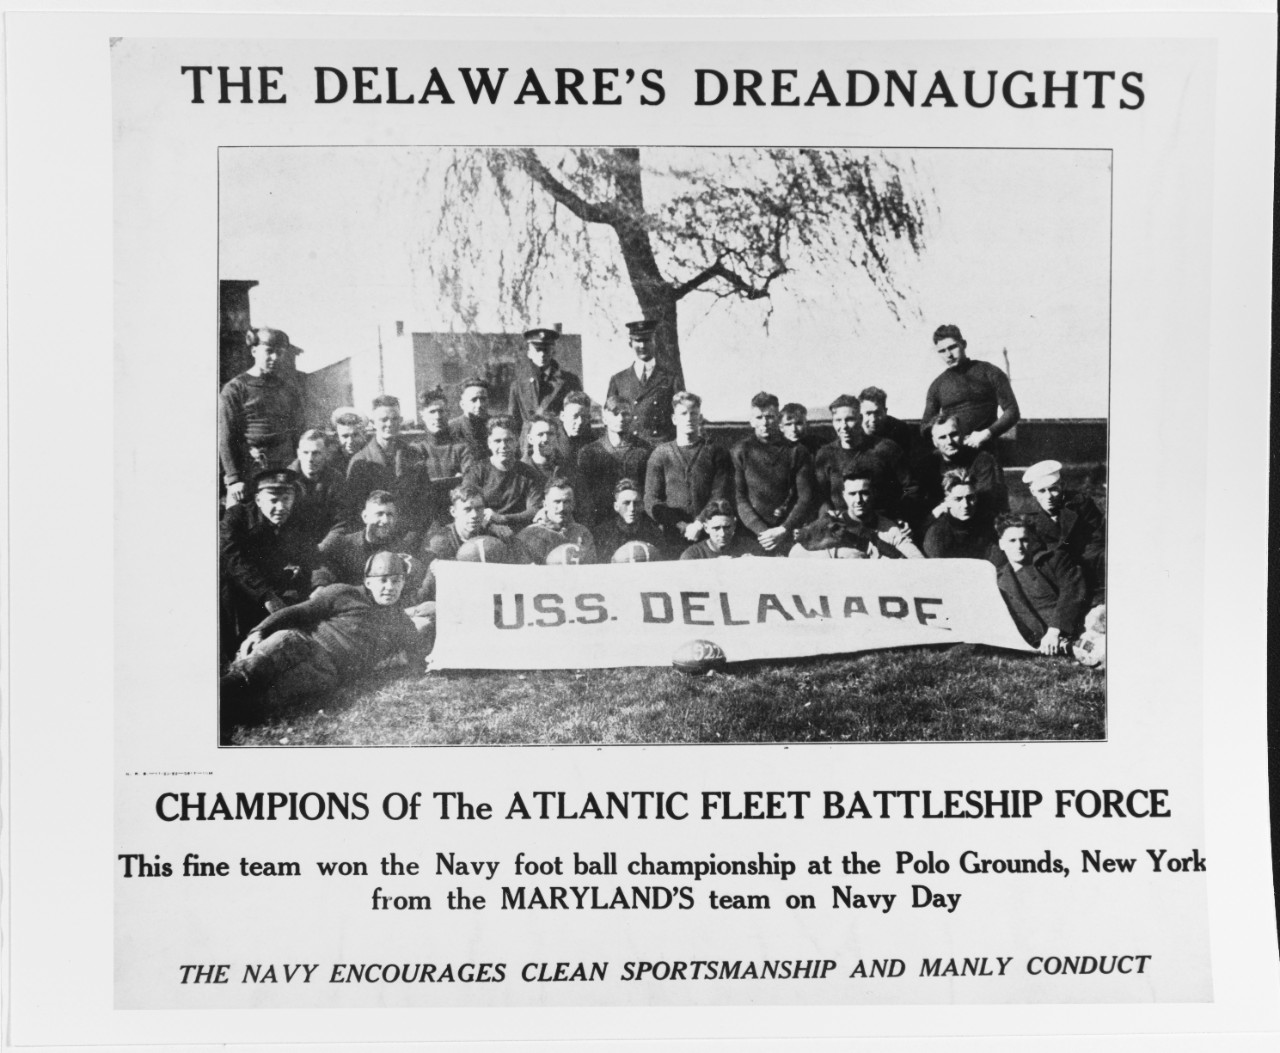 Recruiting Poster: The DELAWARE's Dreadnaughts